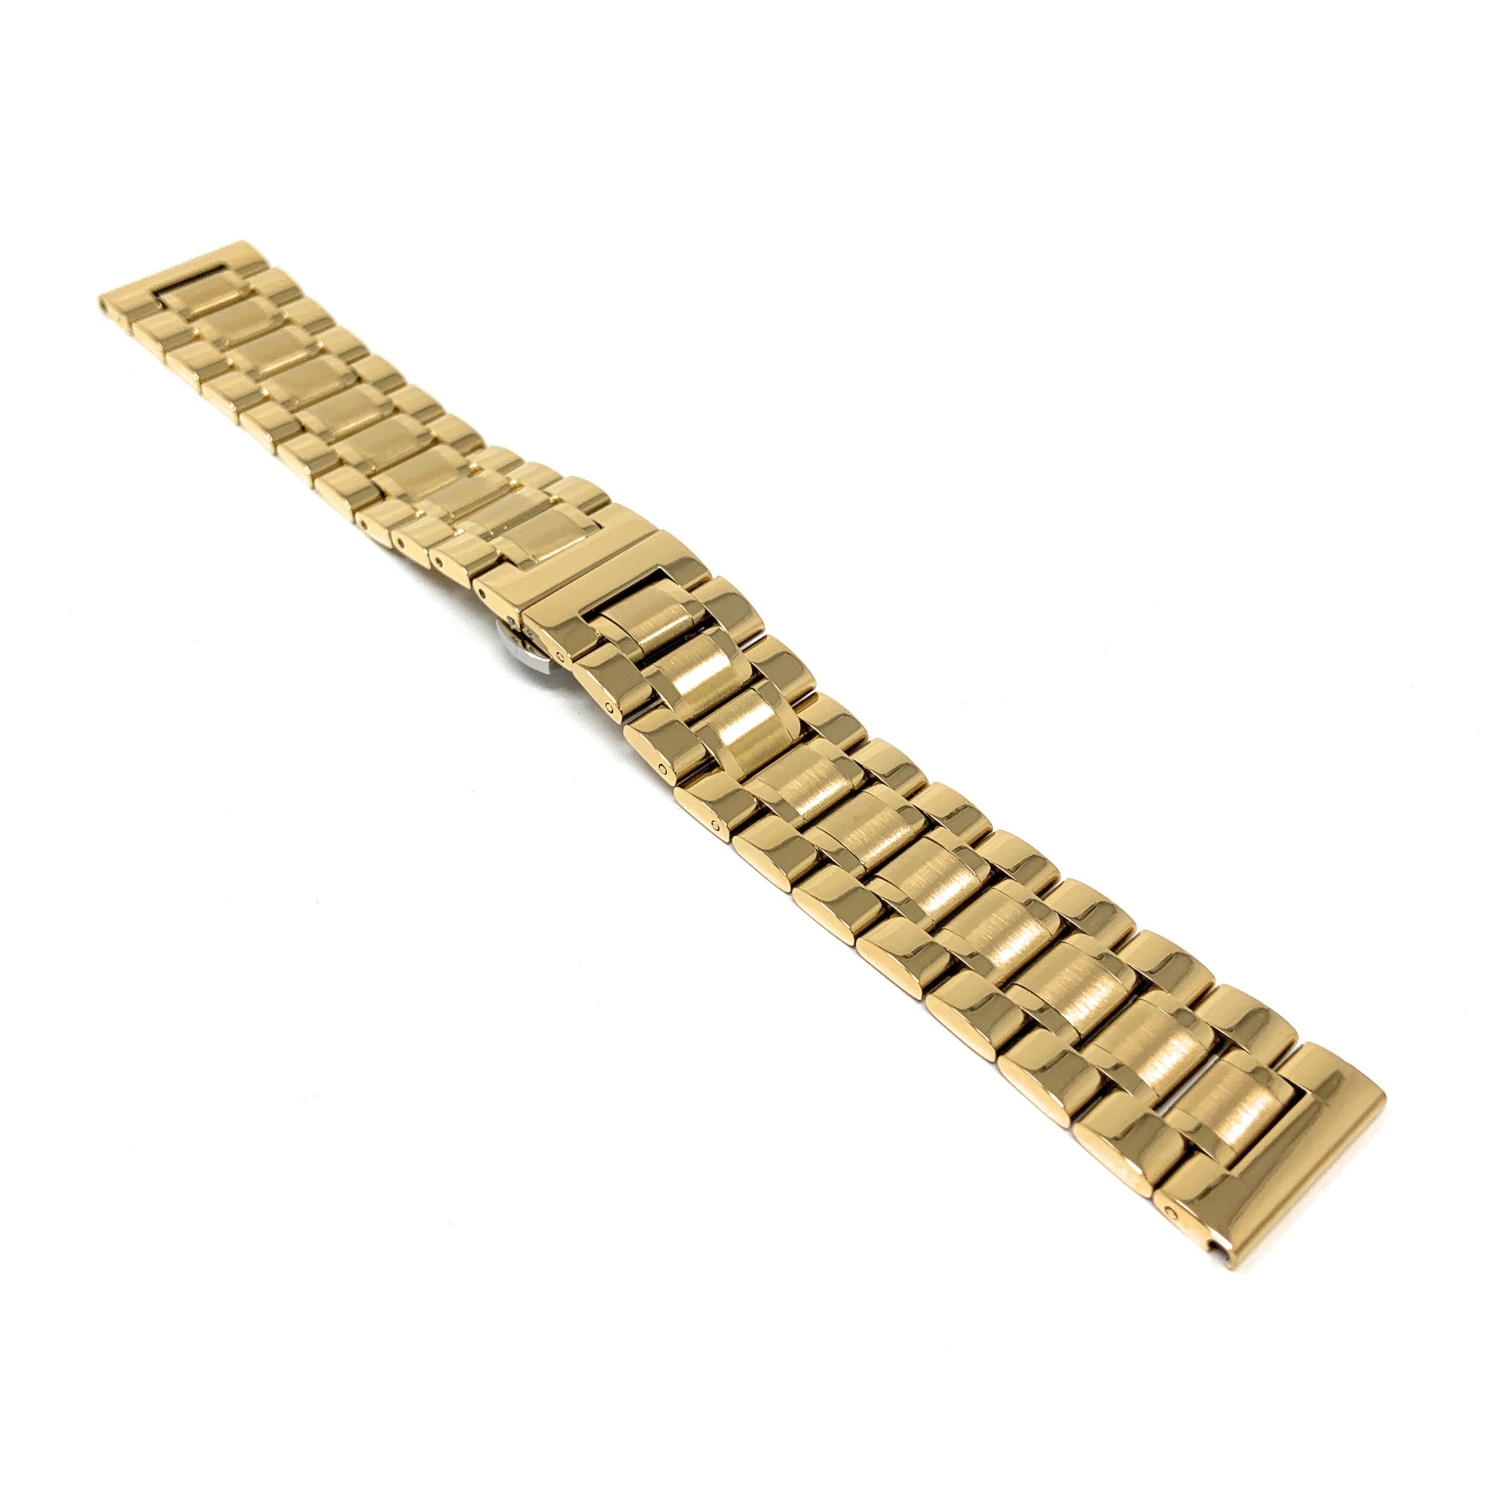 Bandini Stainless Steel Smart Watch Band Strap, Removable Links For Oneplus Watch - 22mm, Gold